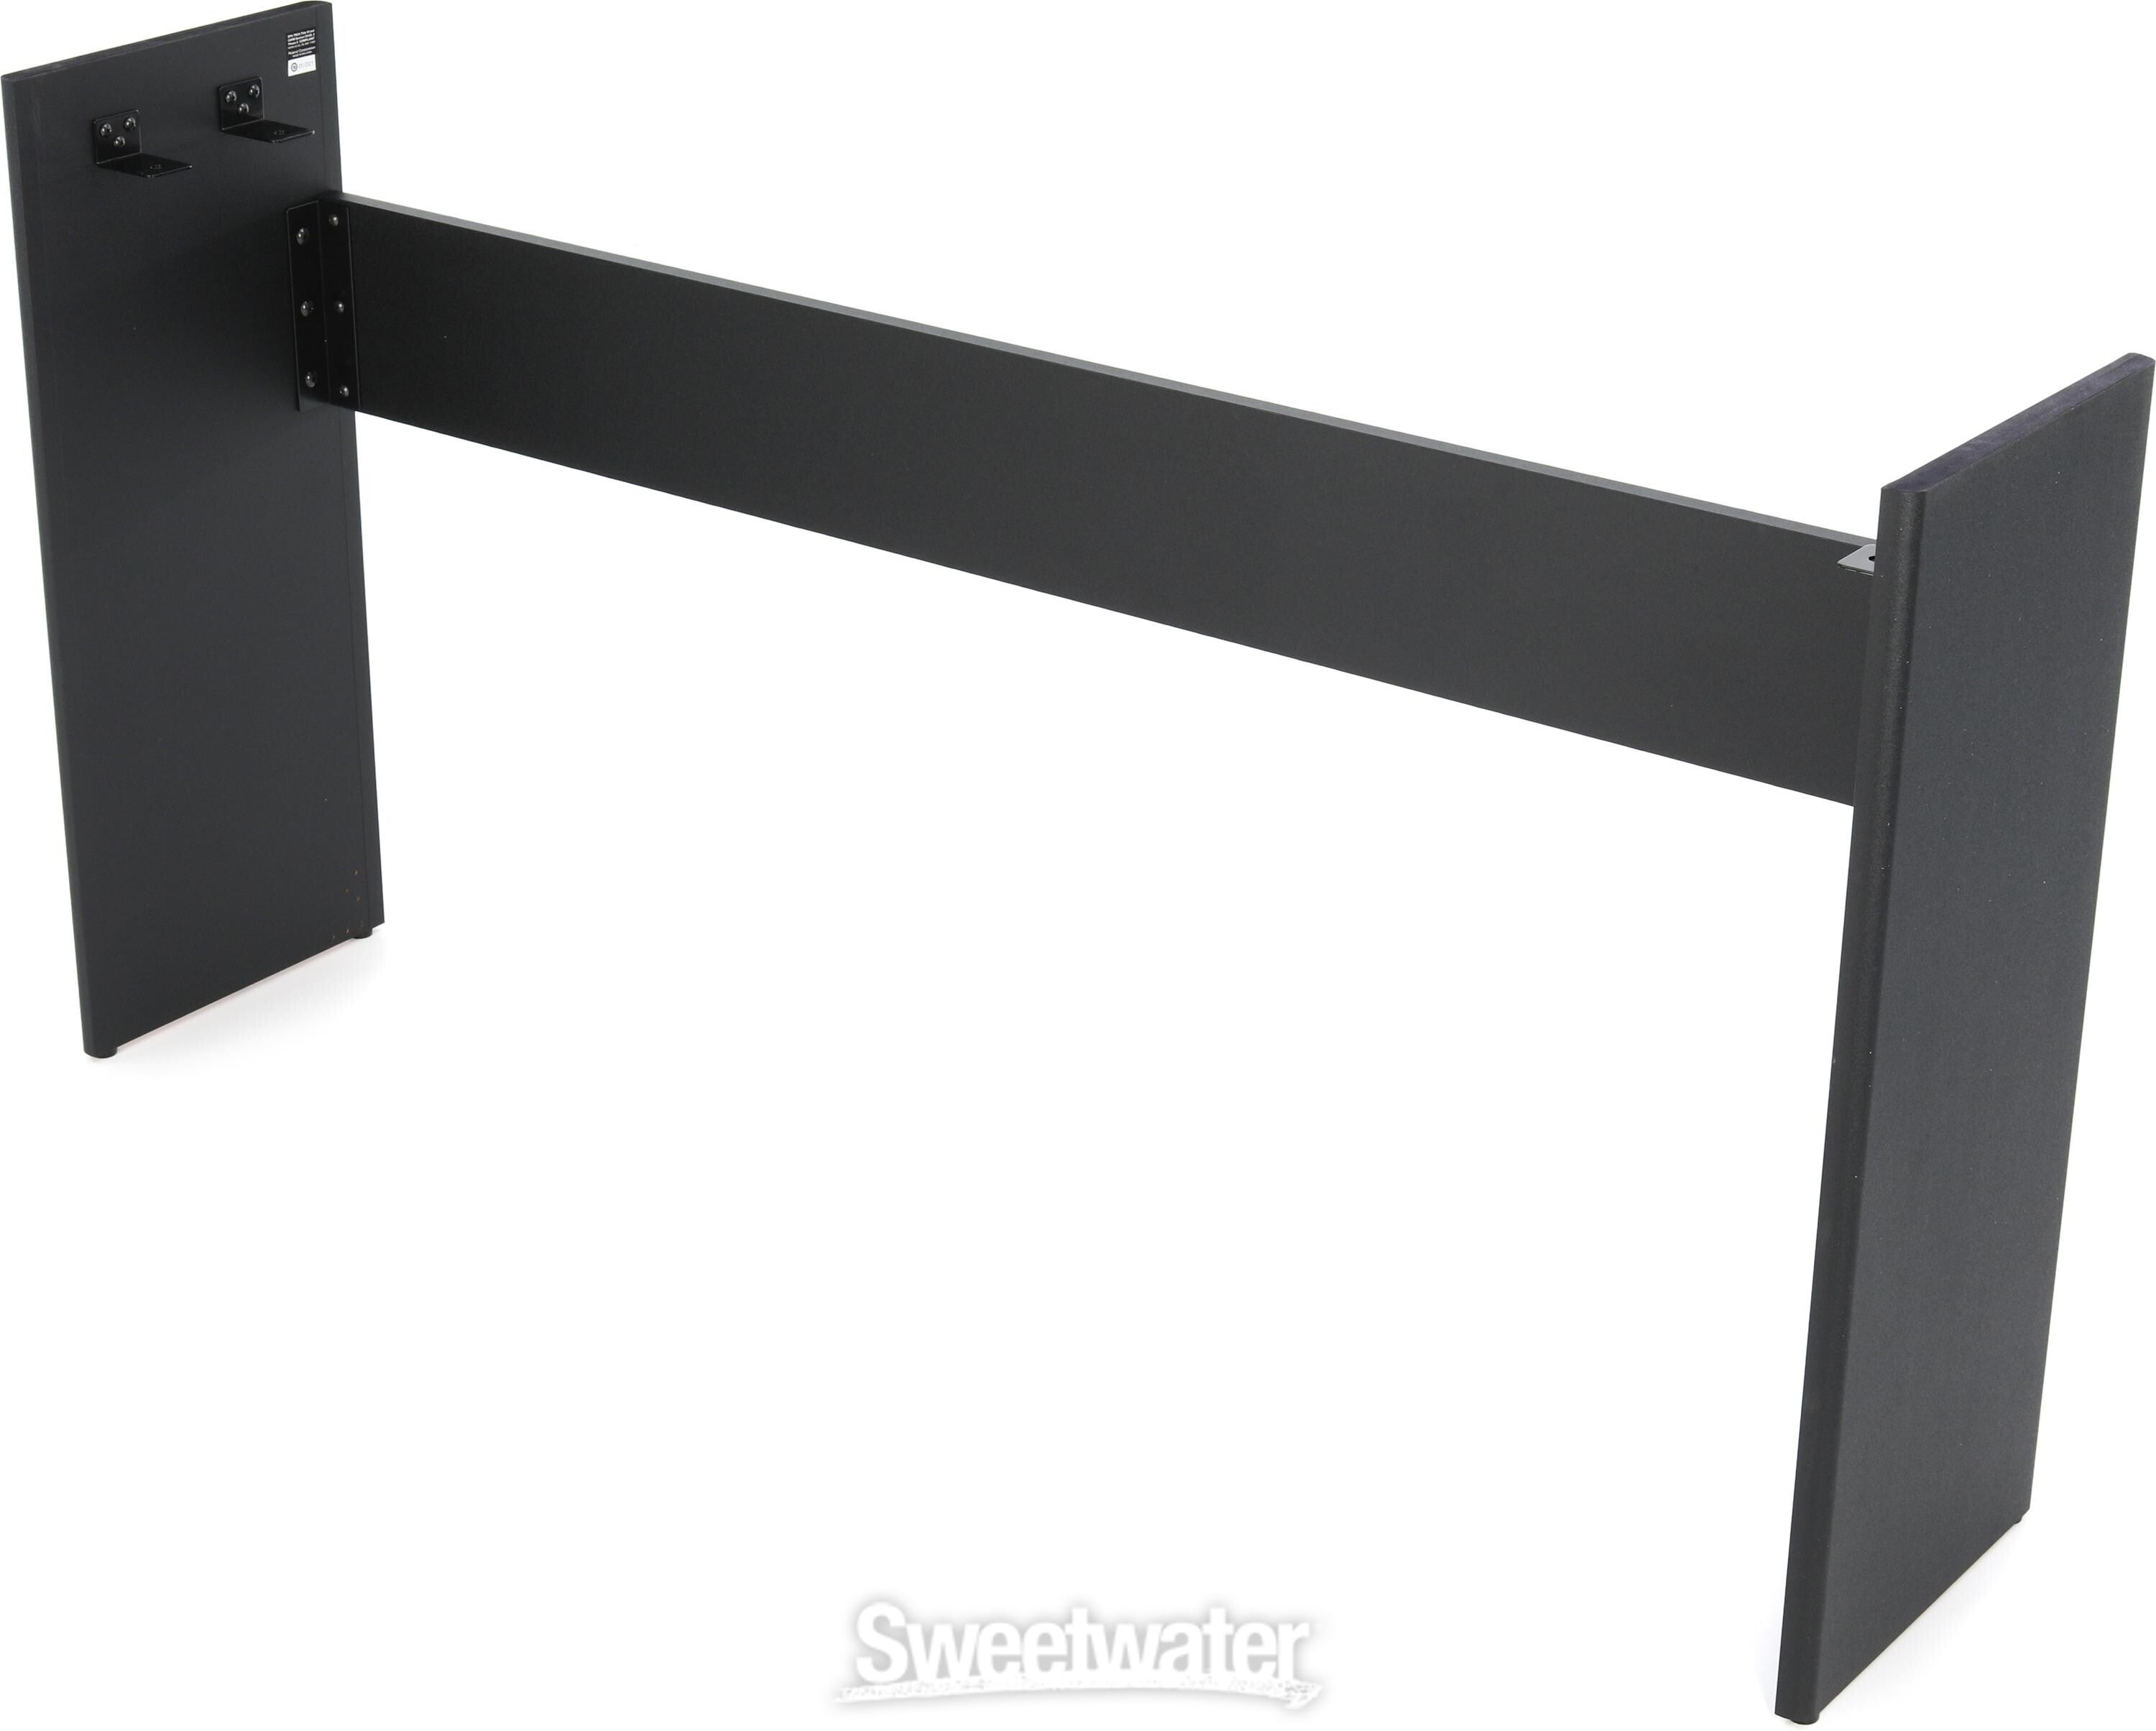 Roland KSC-70 Stand for FP-30x Digital Piano - Black | Sweetwater